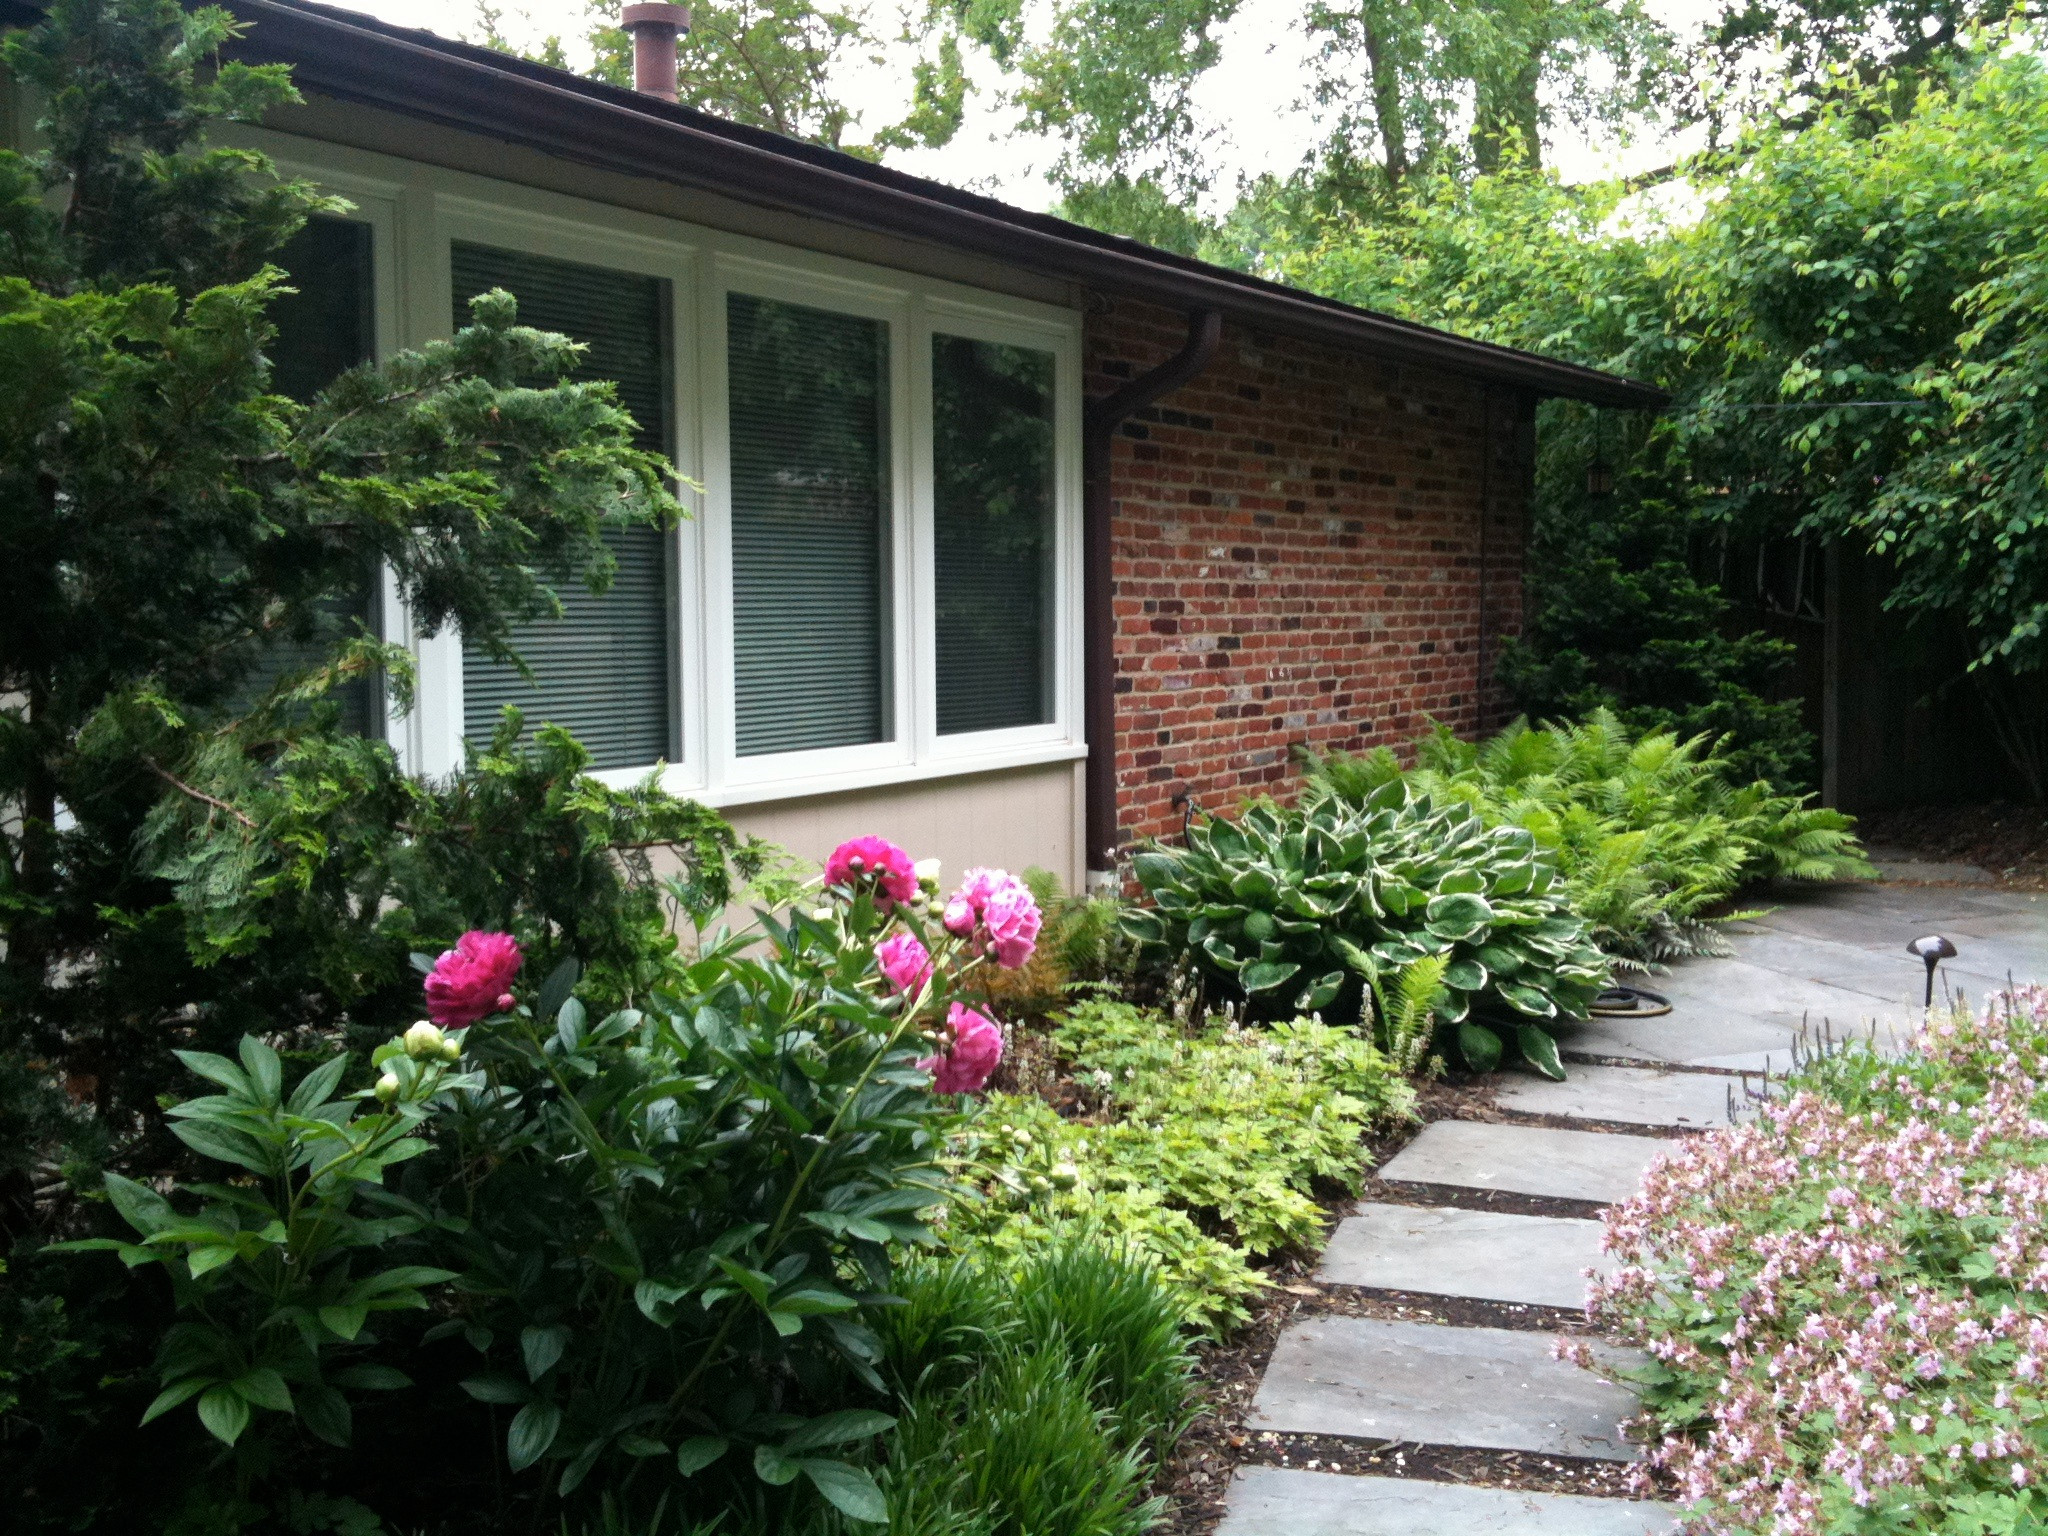 Peonies and hardy geraniums provide color